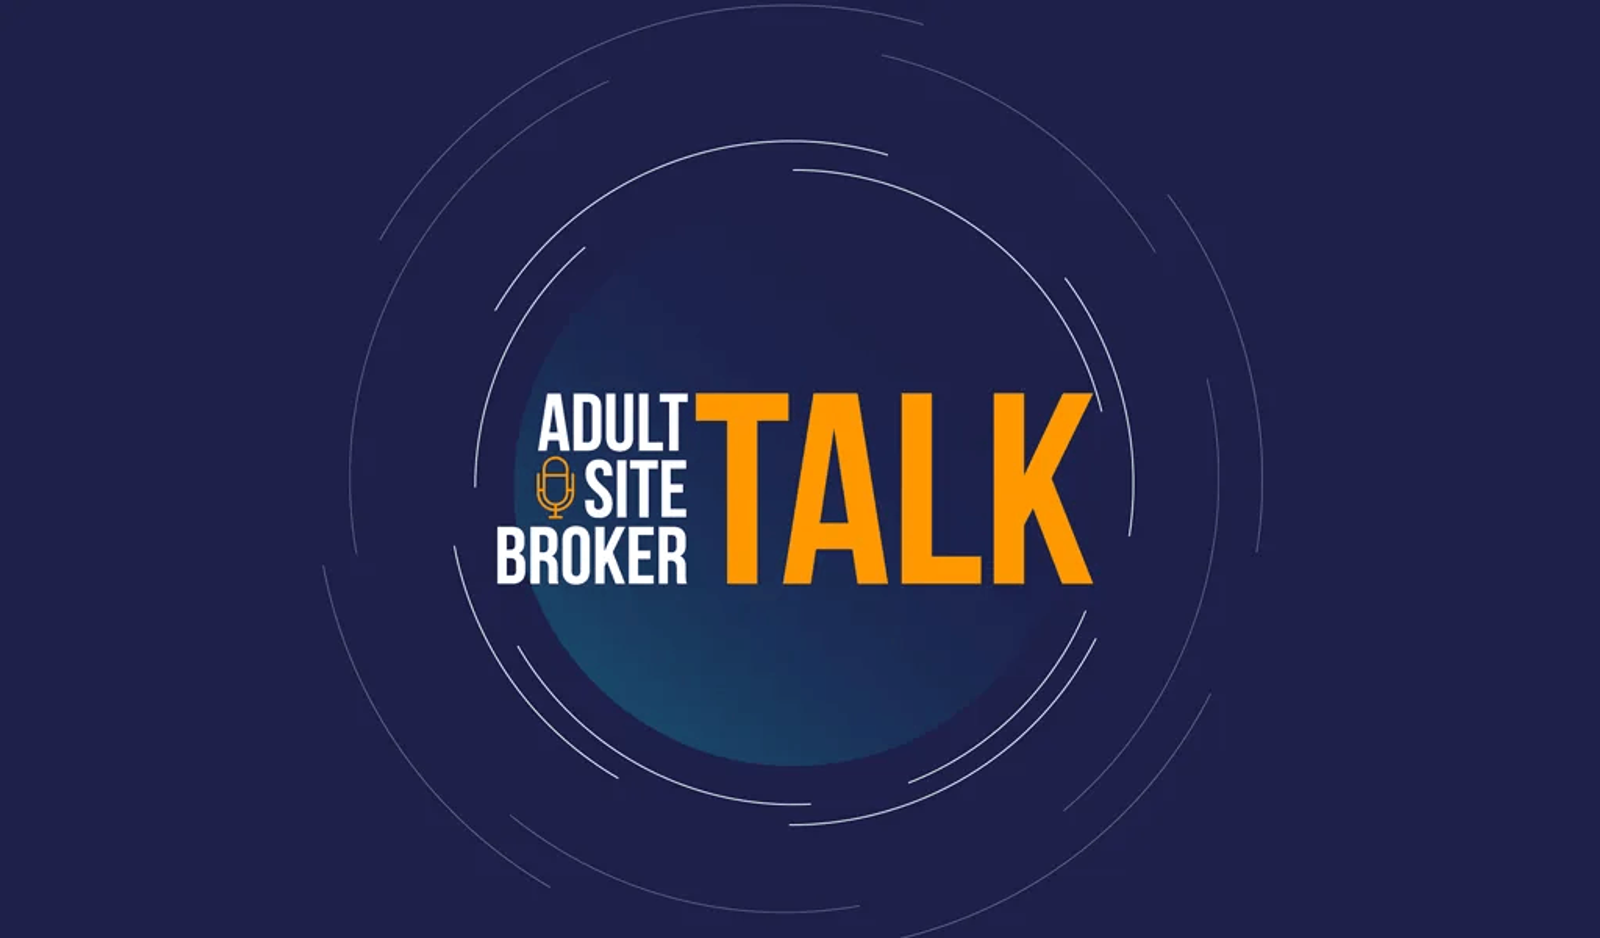 AEBN's Jay Strowd Guests on 'Adult Site Broker Talk' Podcast